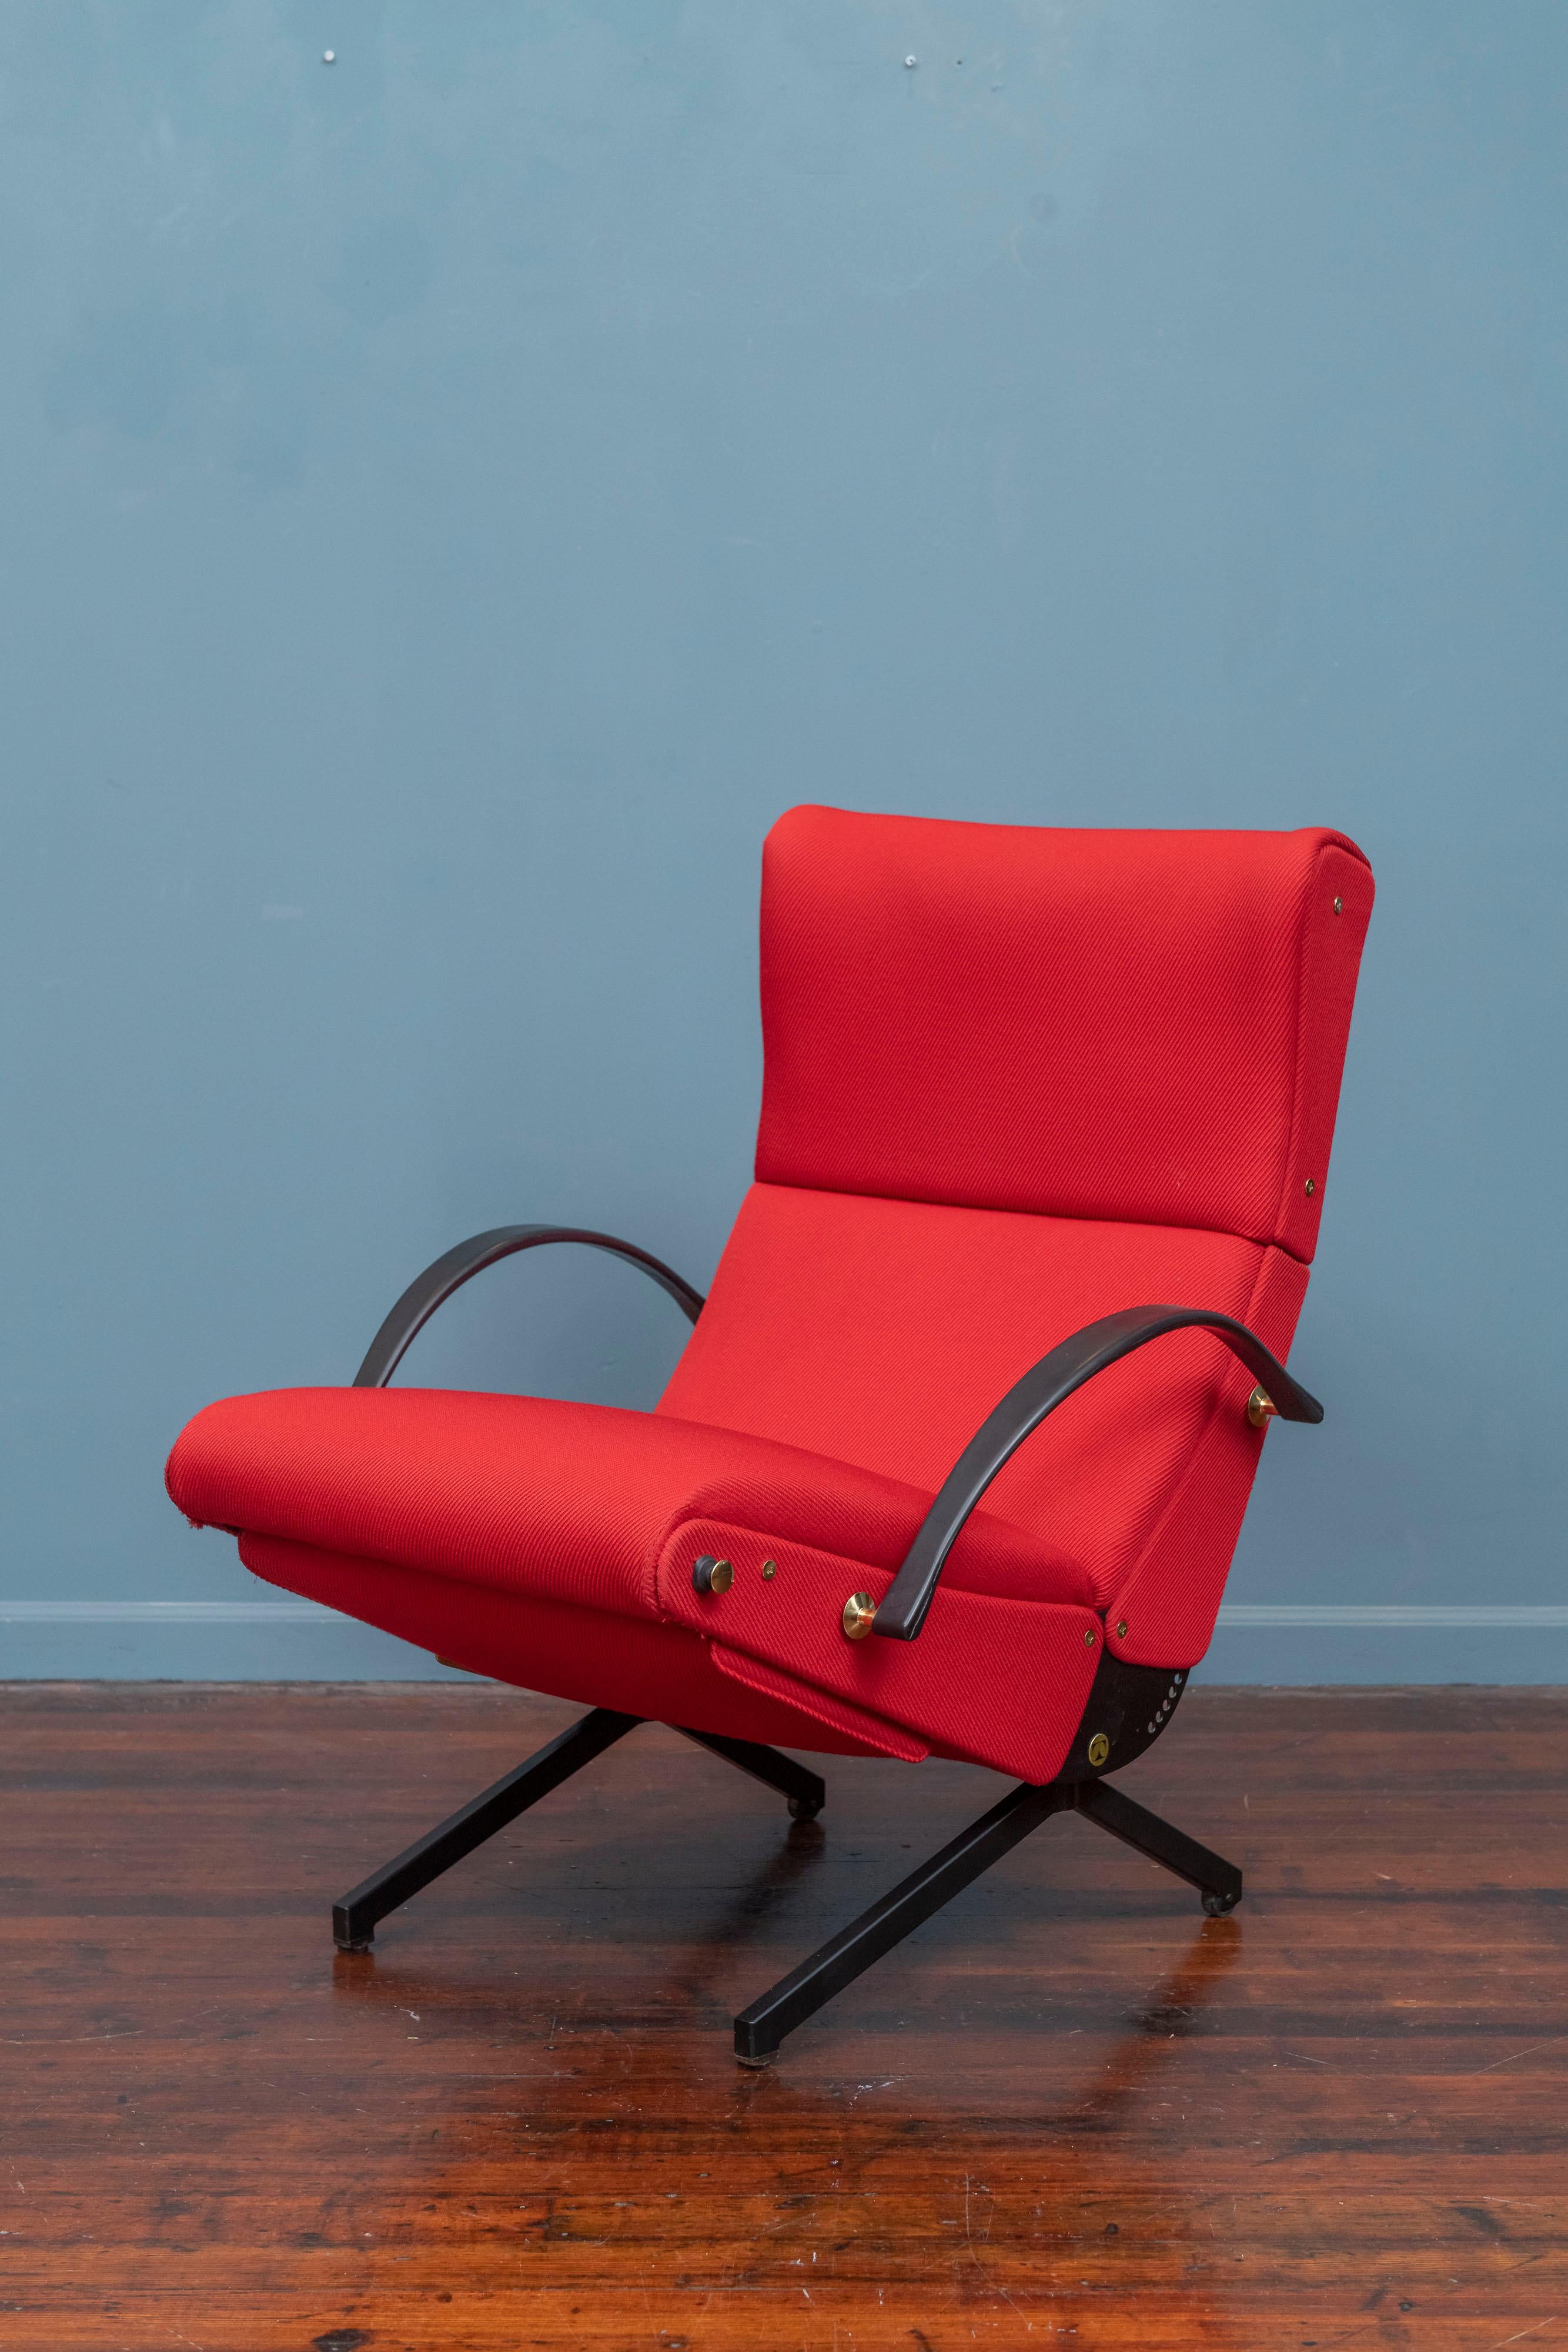 Osvaldo Borsani P40 lounge chair for Tecno, Italy. Newly restored and upholstered in period correct red textured fabric applied on the bias. Iconic design with adjustments for the seat, back and height with a built in foot rest. Rear legs have